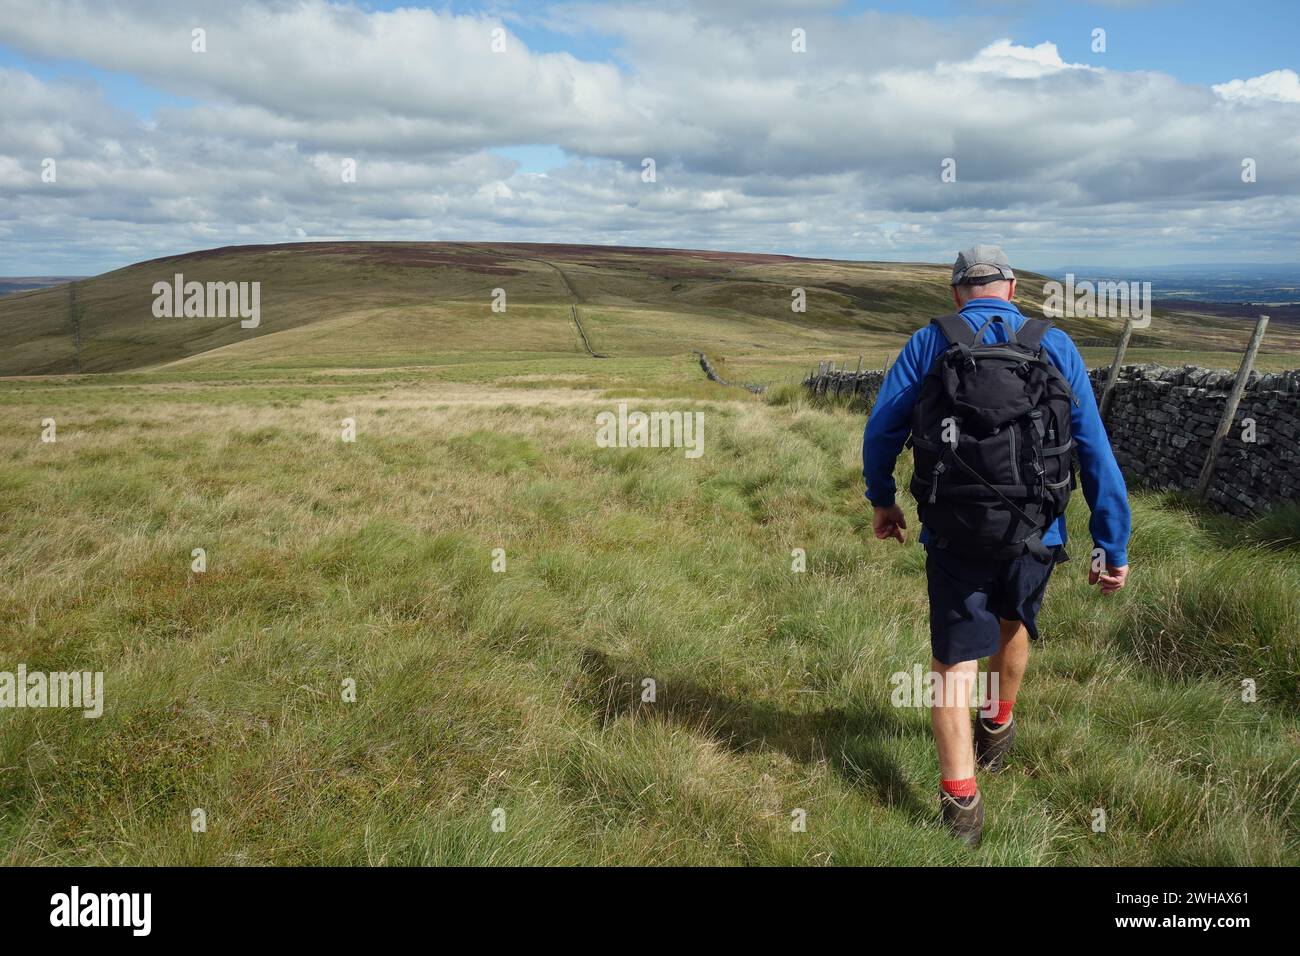 Lone Man (escursionista) Walking on Path by the Wall da "Harland Hill" a "Height of Hazely" vicino a West Burton nel Yorkshire Dales National Park, Inghilterra. Foto Stock